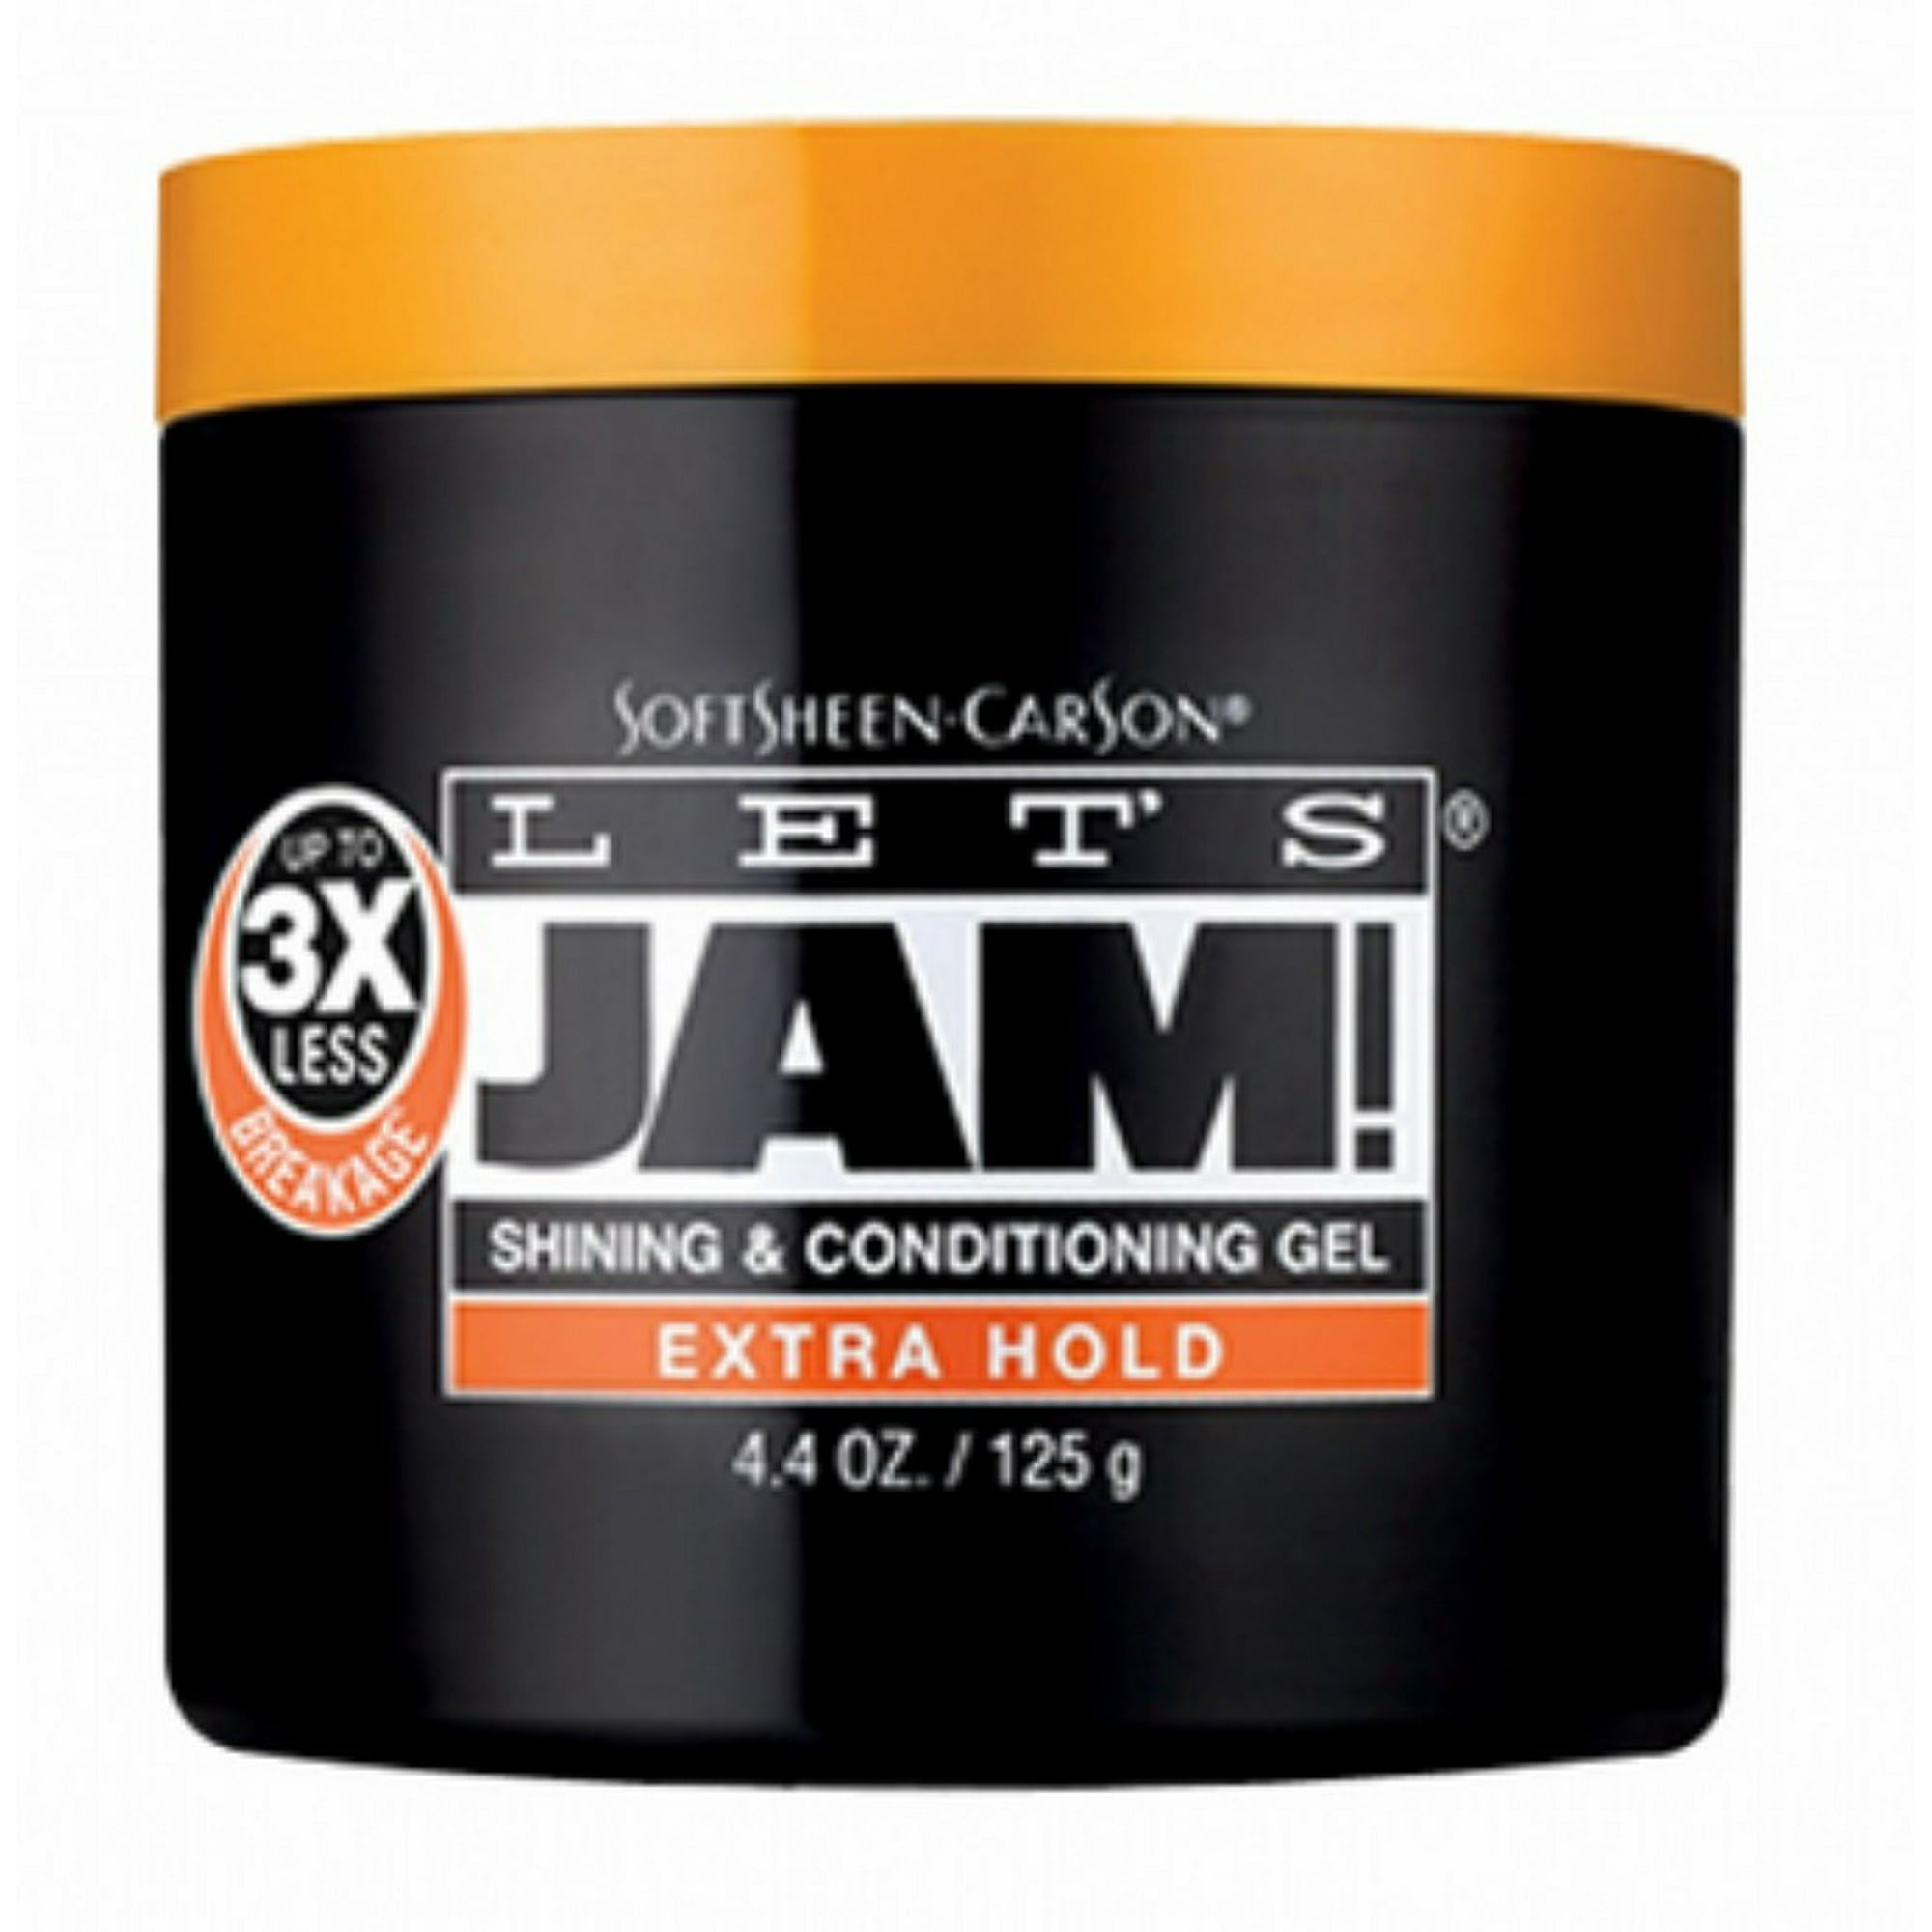 Let's Jam Extra Hold 4.4oz